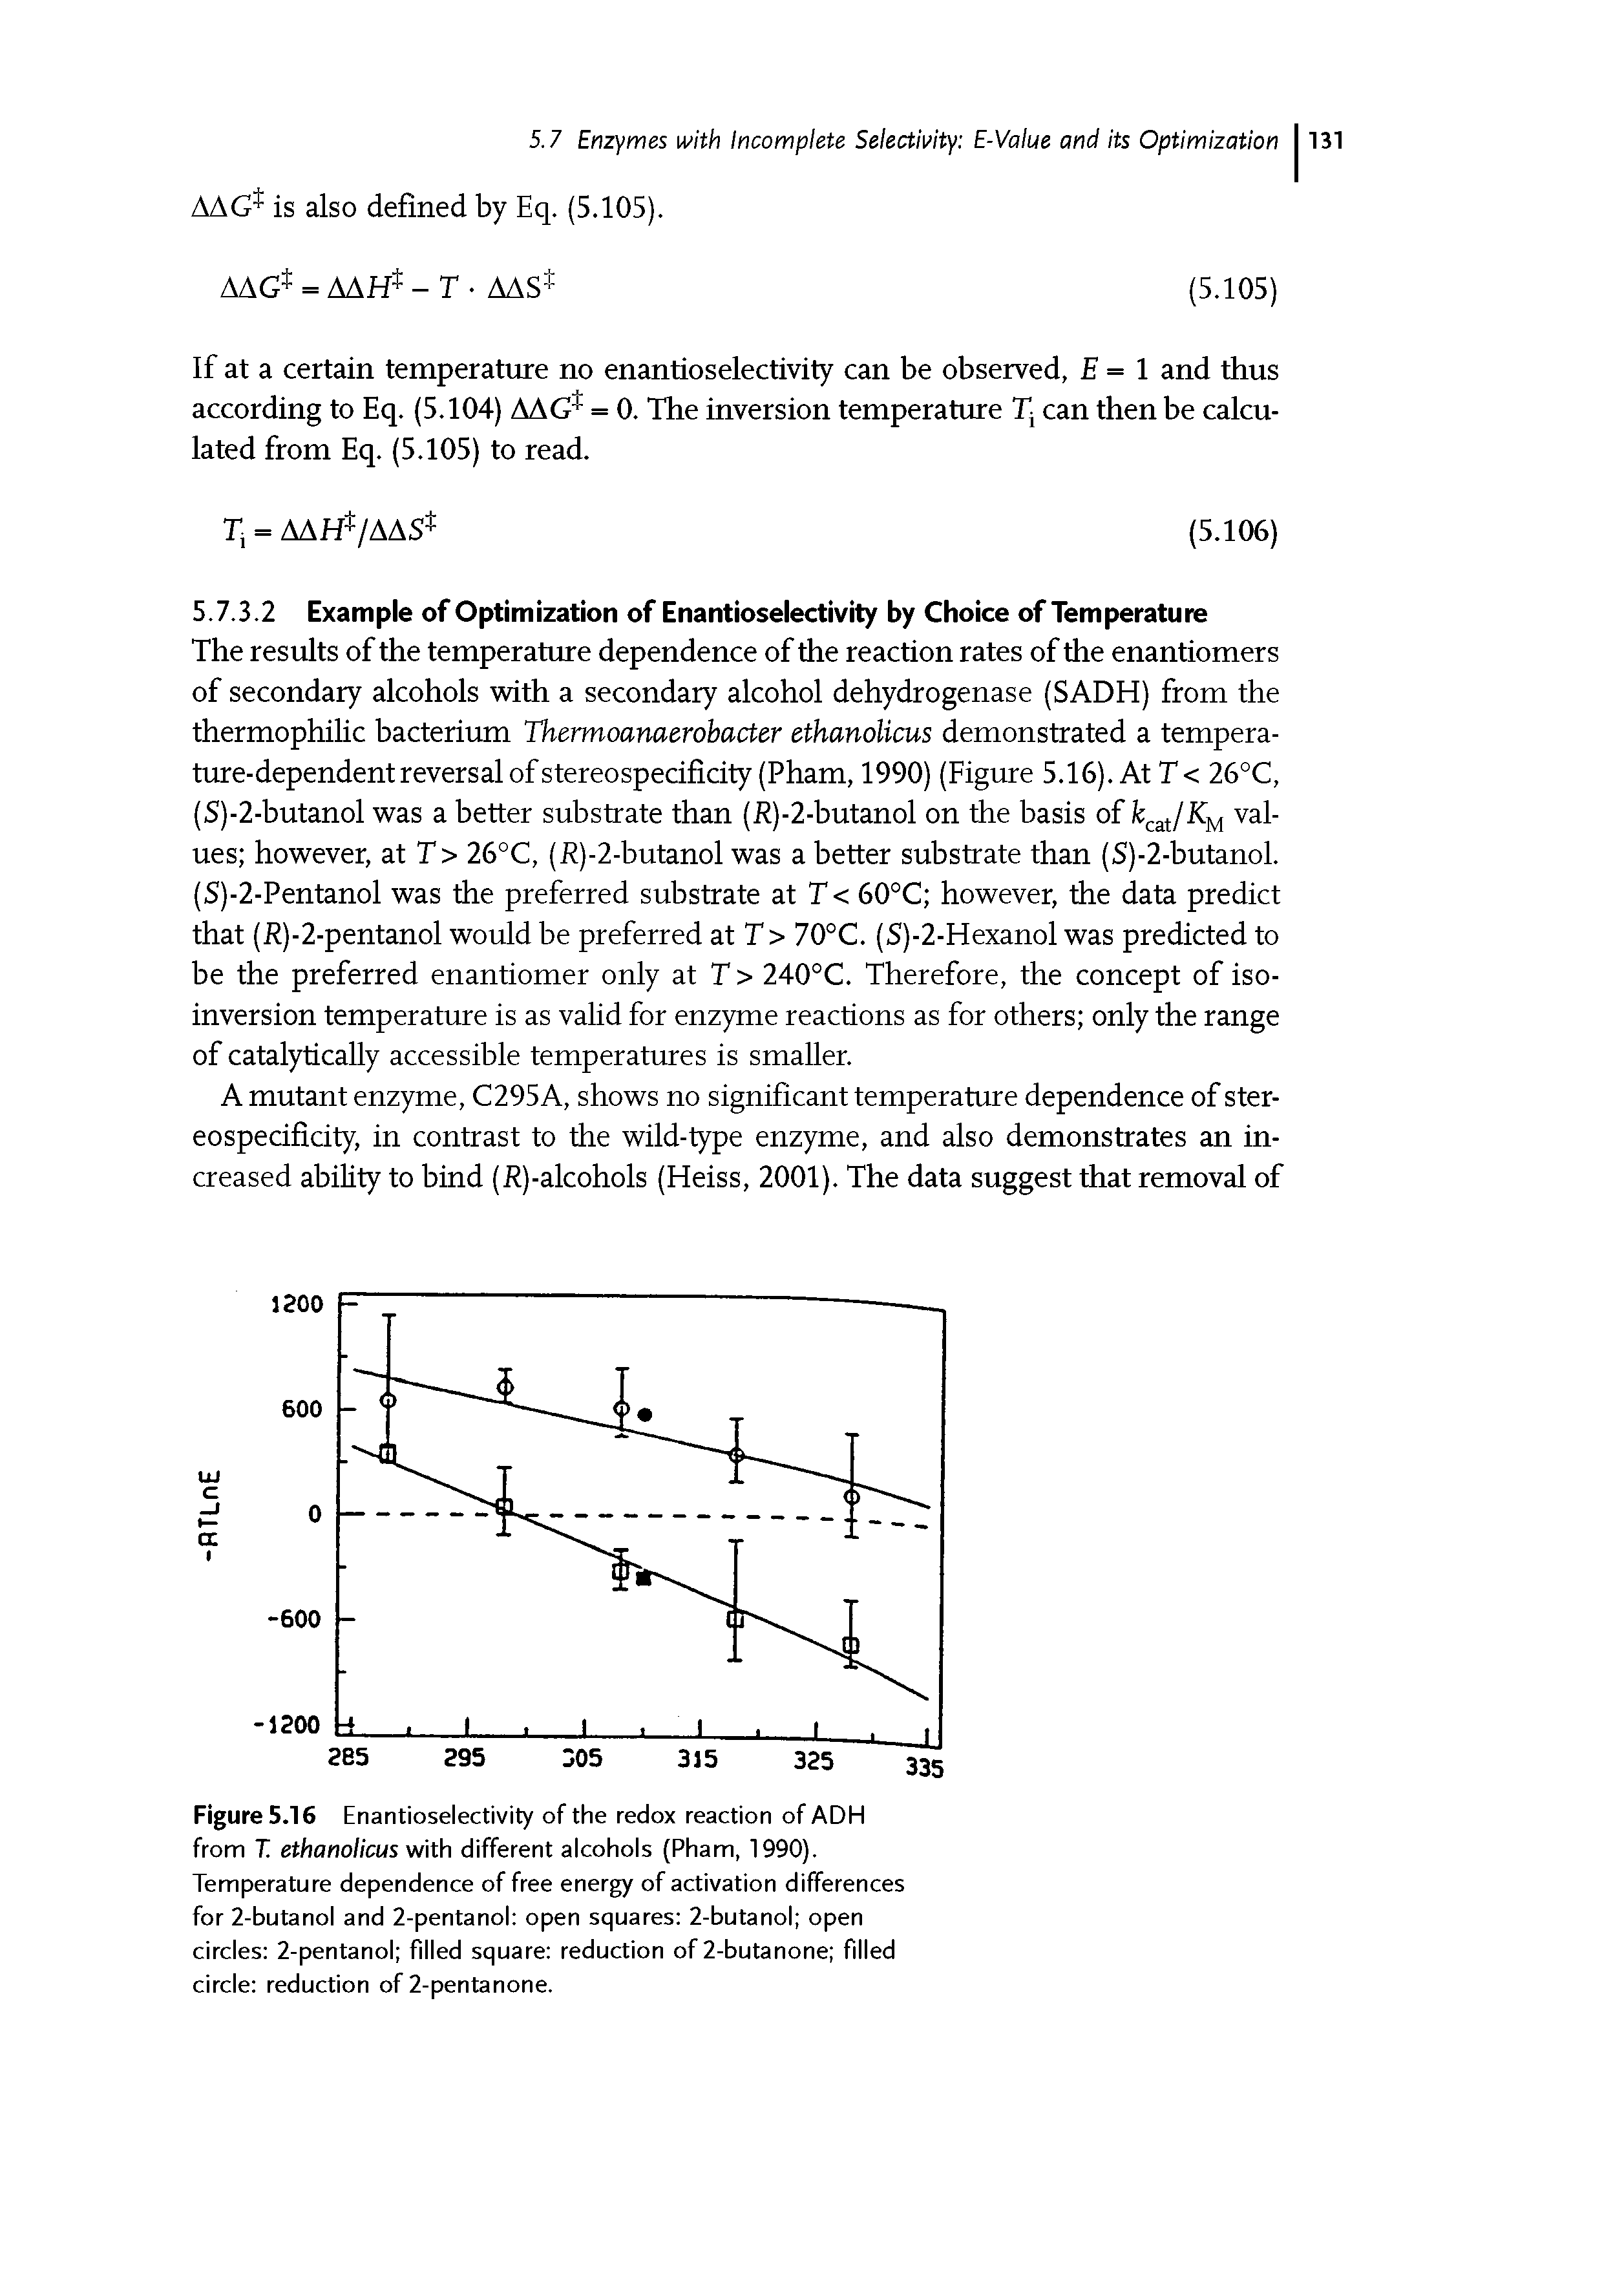 Figure 5.16 Enantioselectivity of the redox reaction of ADH from T. ethanolicus with different alcohols (Pham, 1990). Temperature dependence of free energy of activation differences for 2-butanol and 2-pentanol open squares 2-butanol open circles 2-pentanol filled square reduction of 2-butanone filled circle reduction of 2-pentanone.